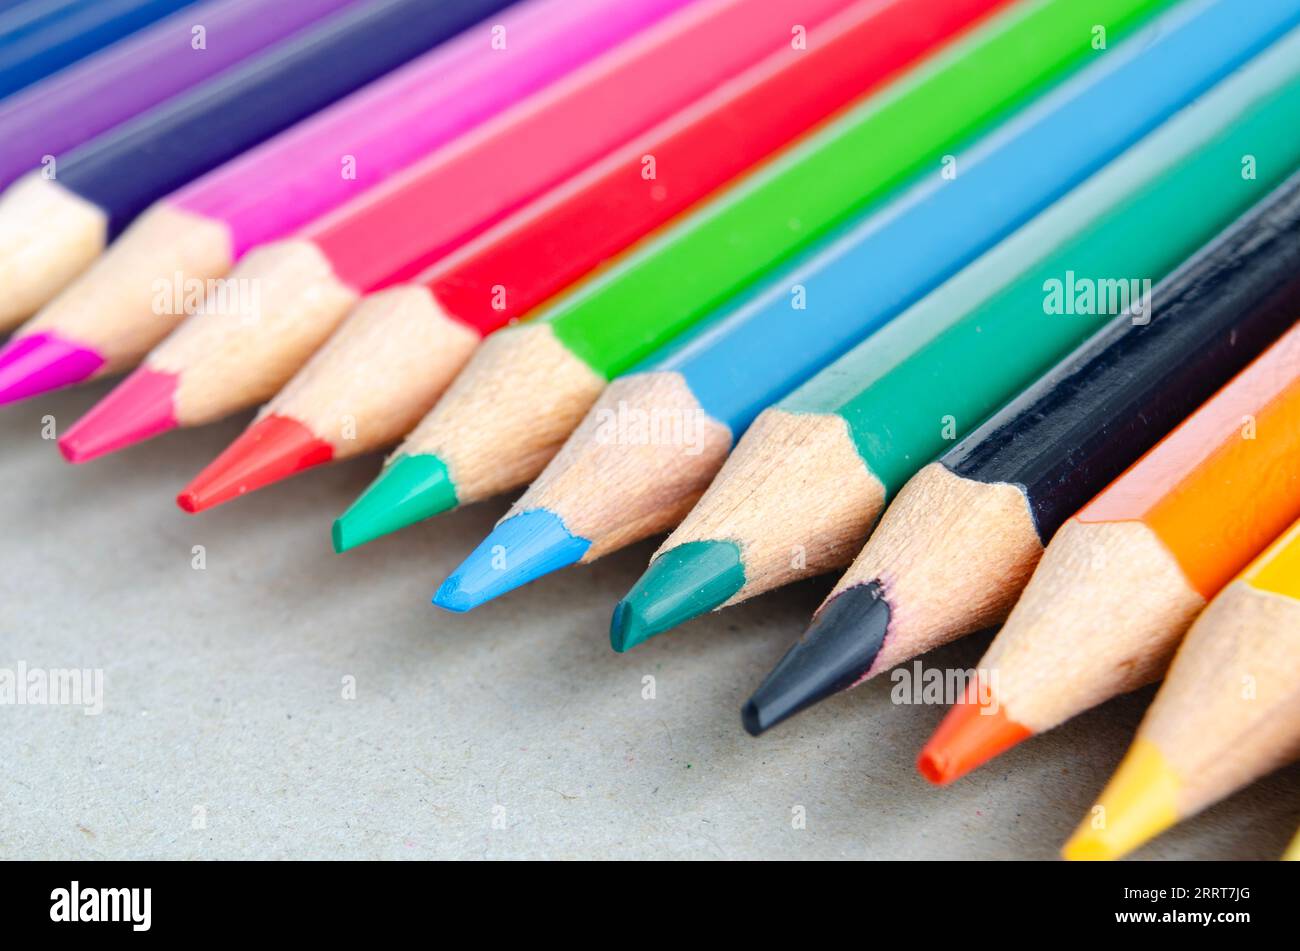 Straight Line Of Color Pencils For Kids Isolated On Pure White